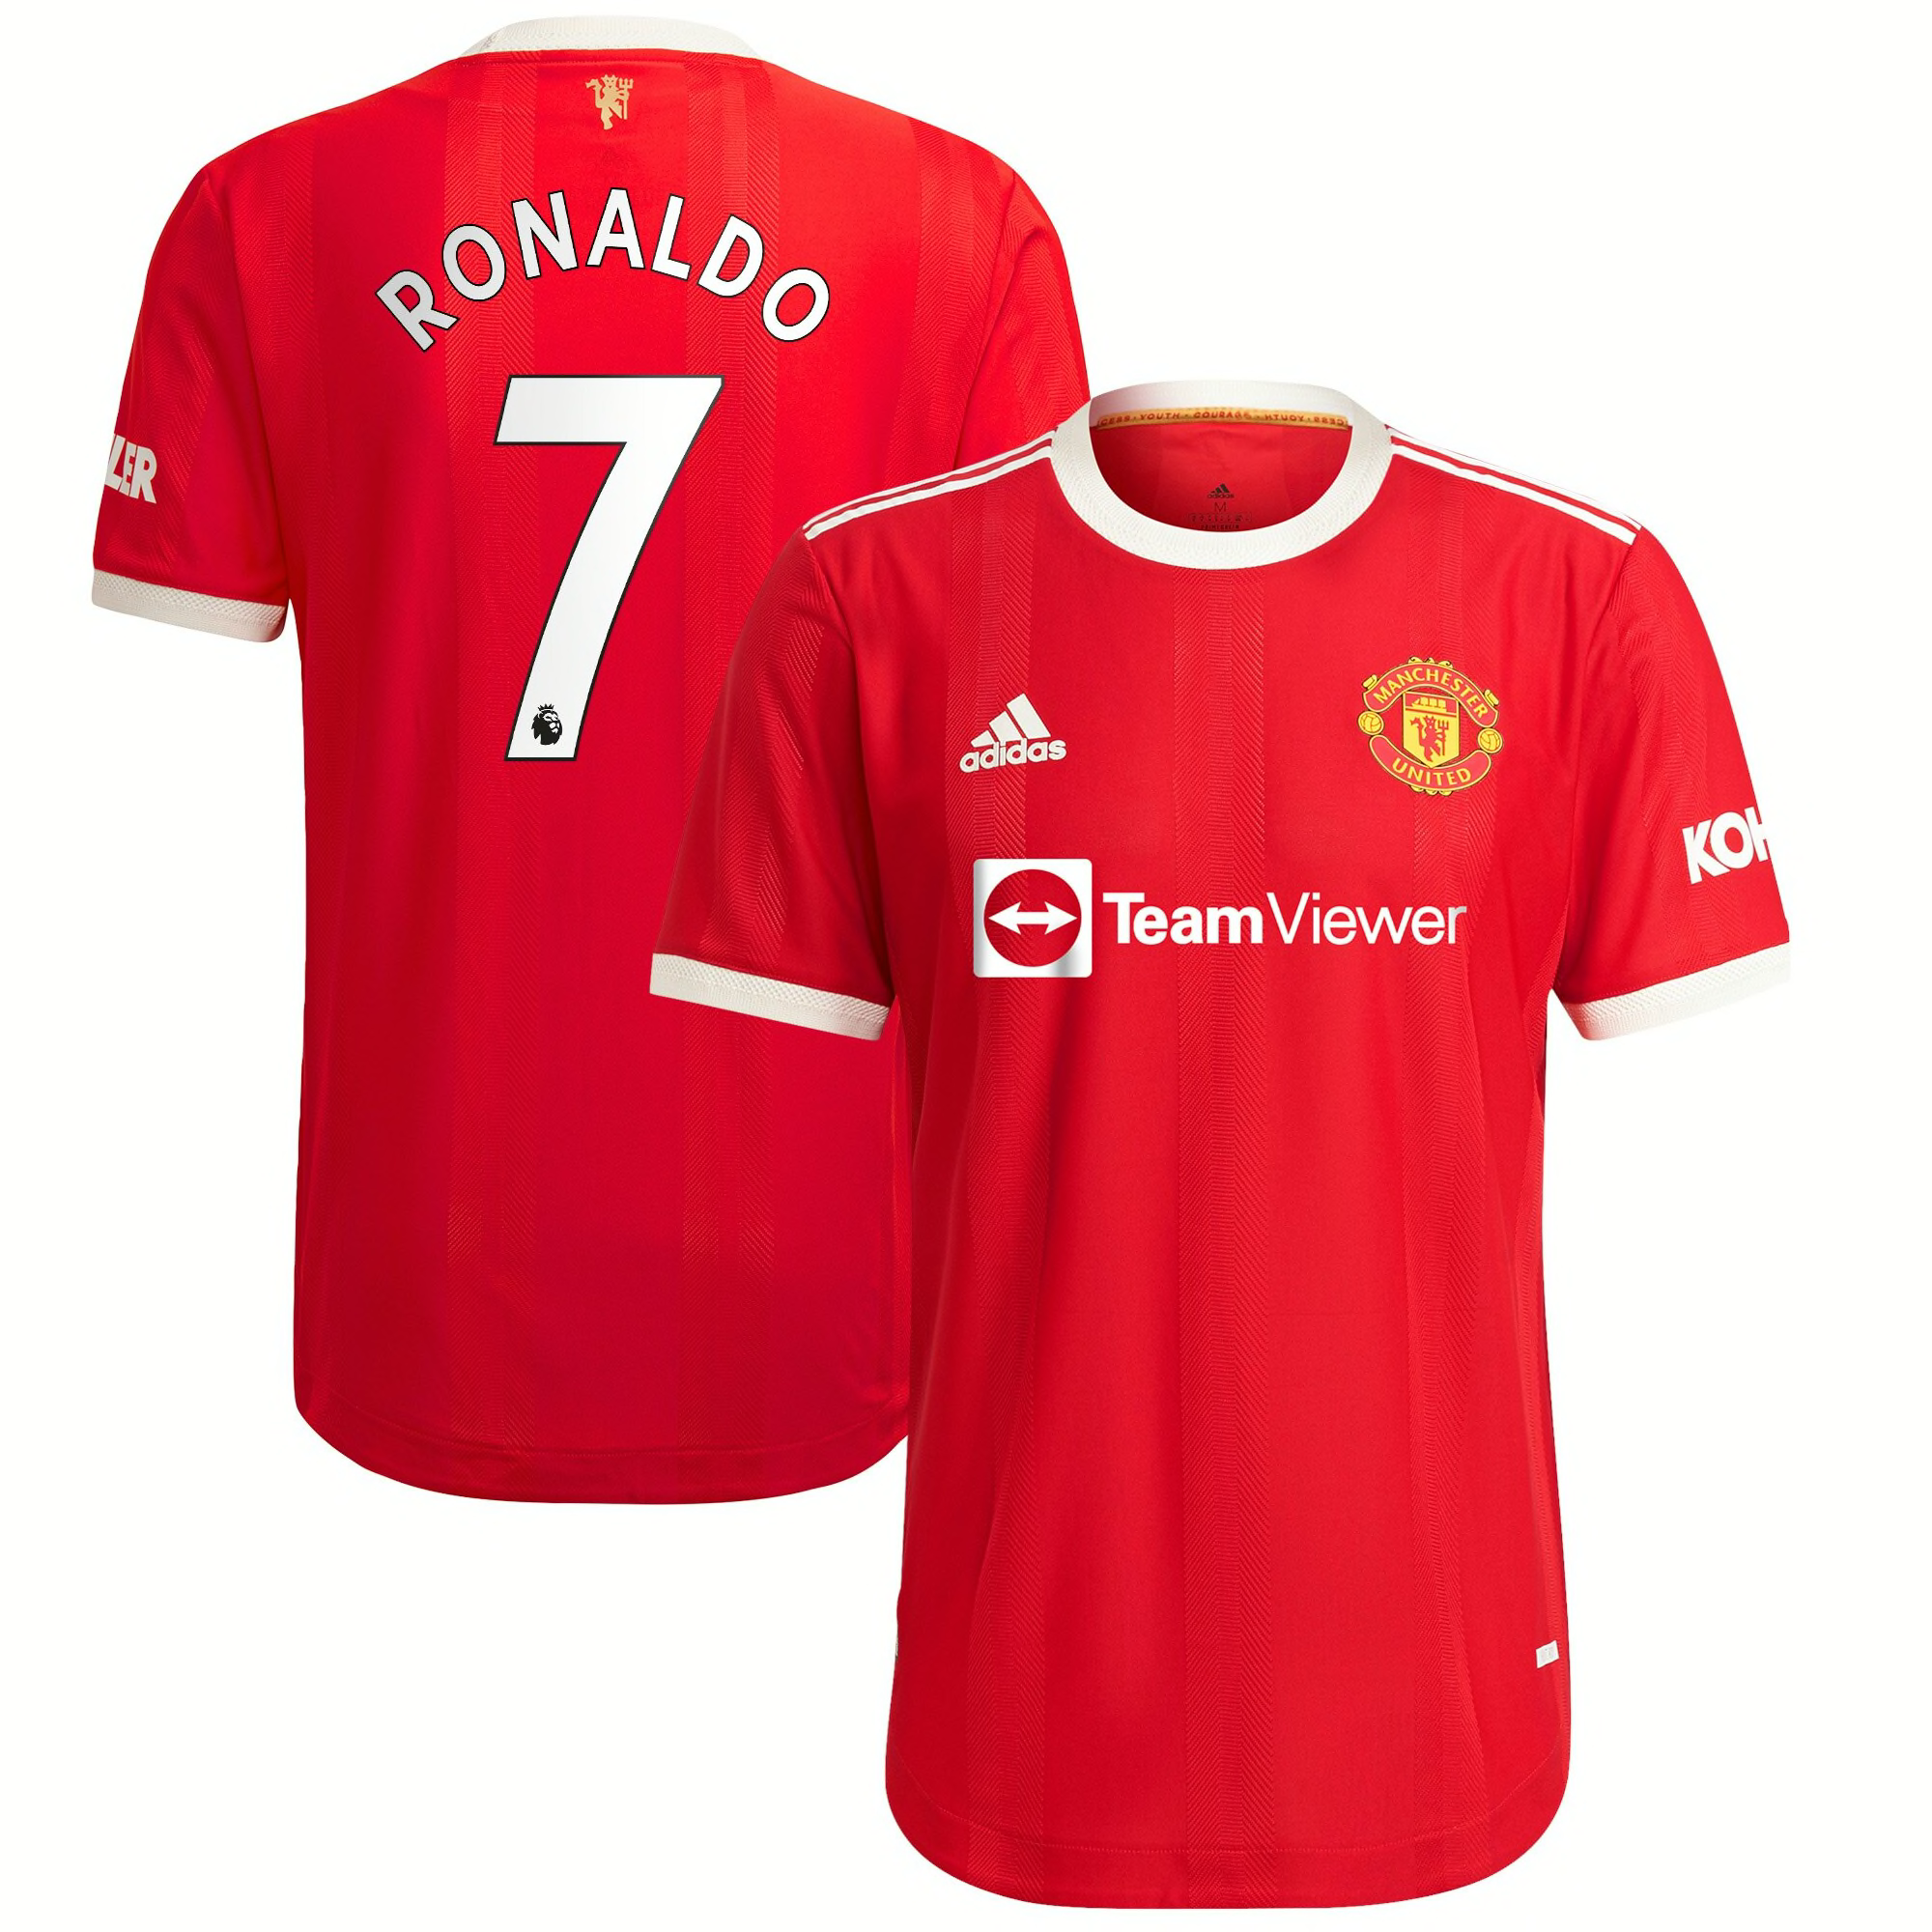 Get your Cristiano Ronaldo Manchester United kits now